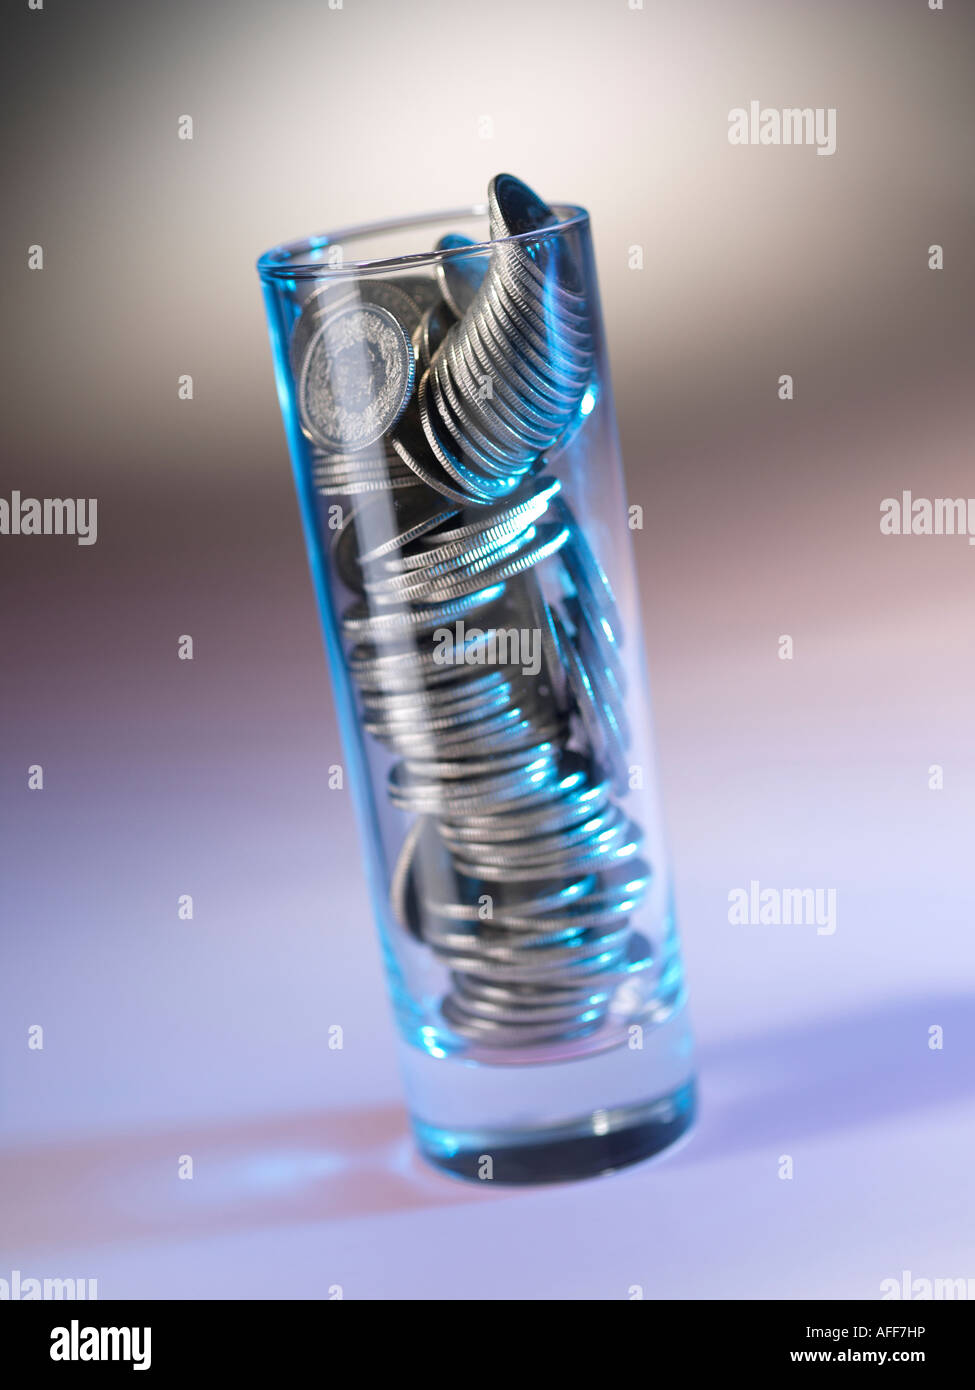 glass filled with coins Stock Photo